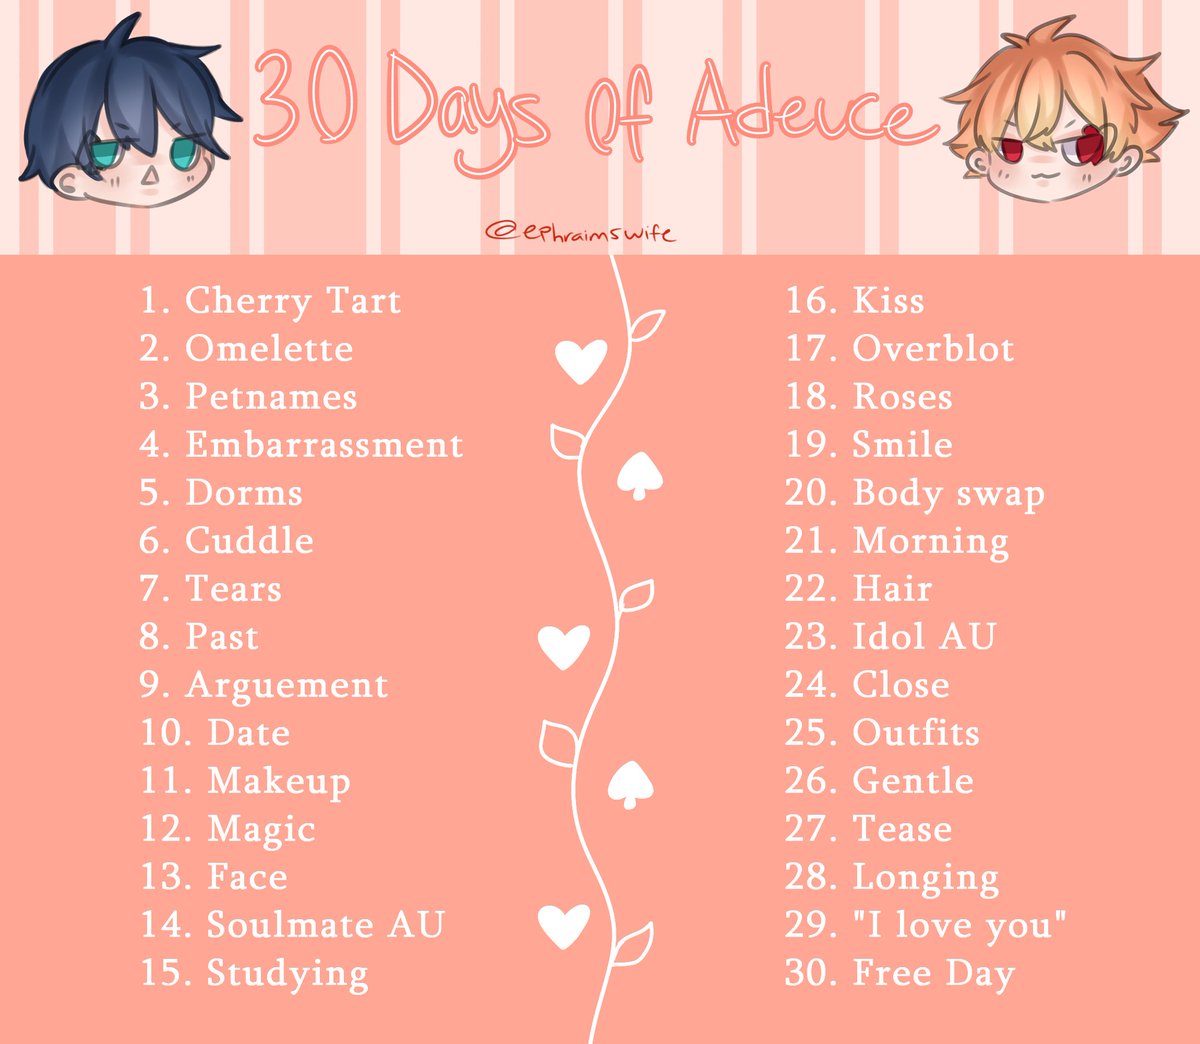 30 Days Of Adeuce[RTs appreciated!]I made this for my own convenience but I thought I'd share it with yall in case u wanna do it too uwu[Rules in the thread]